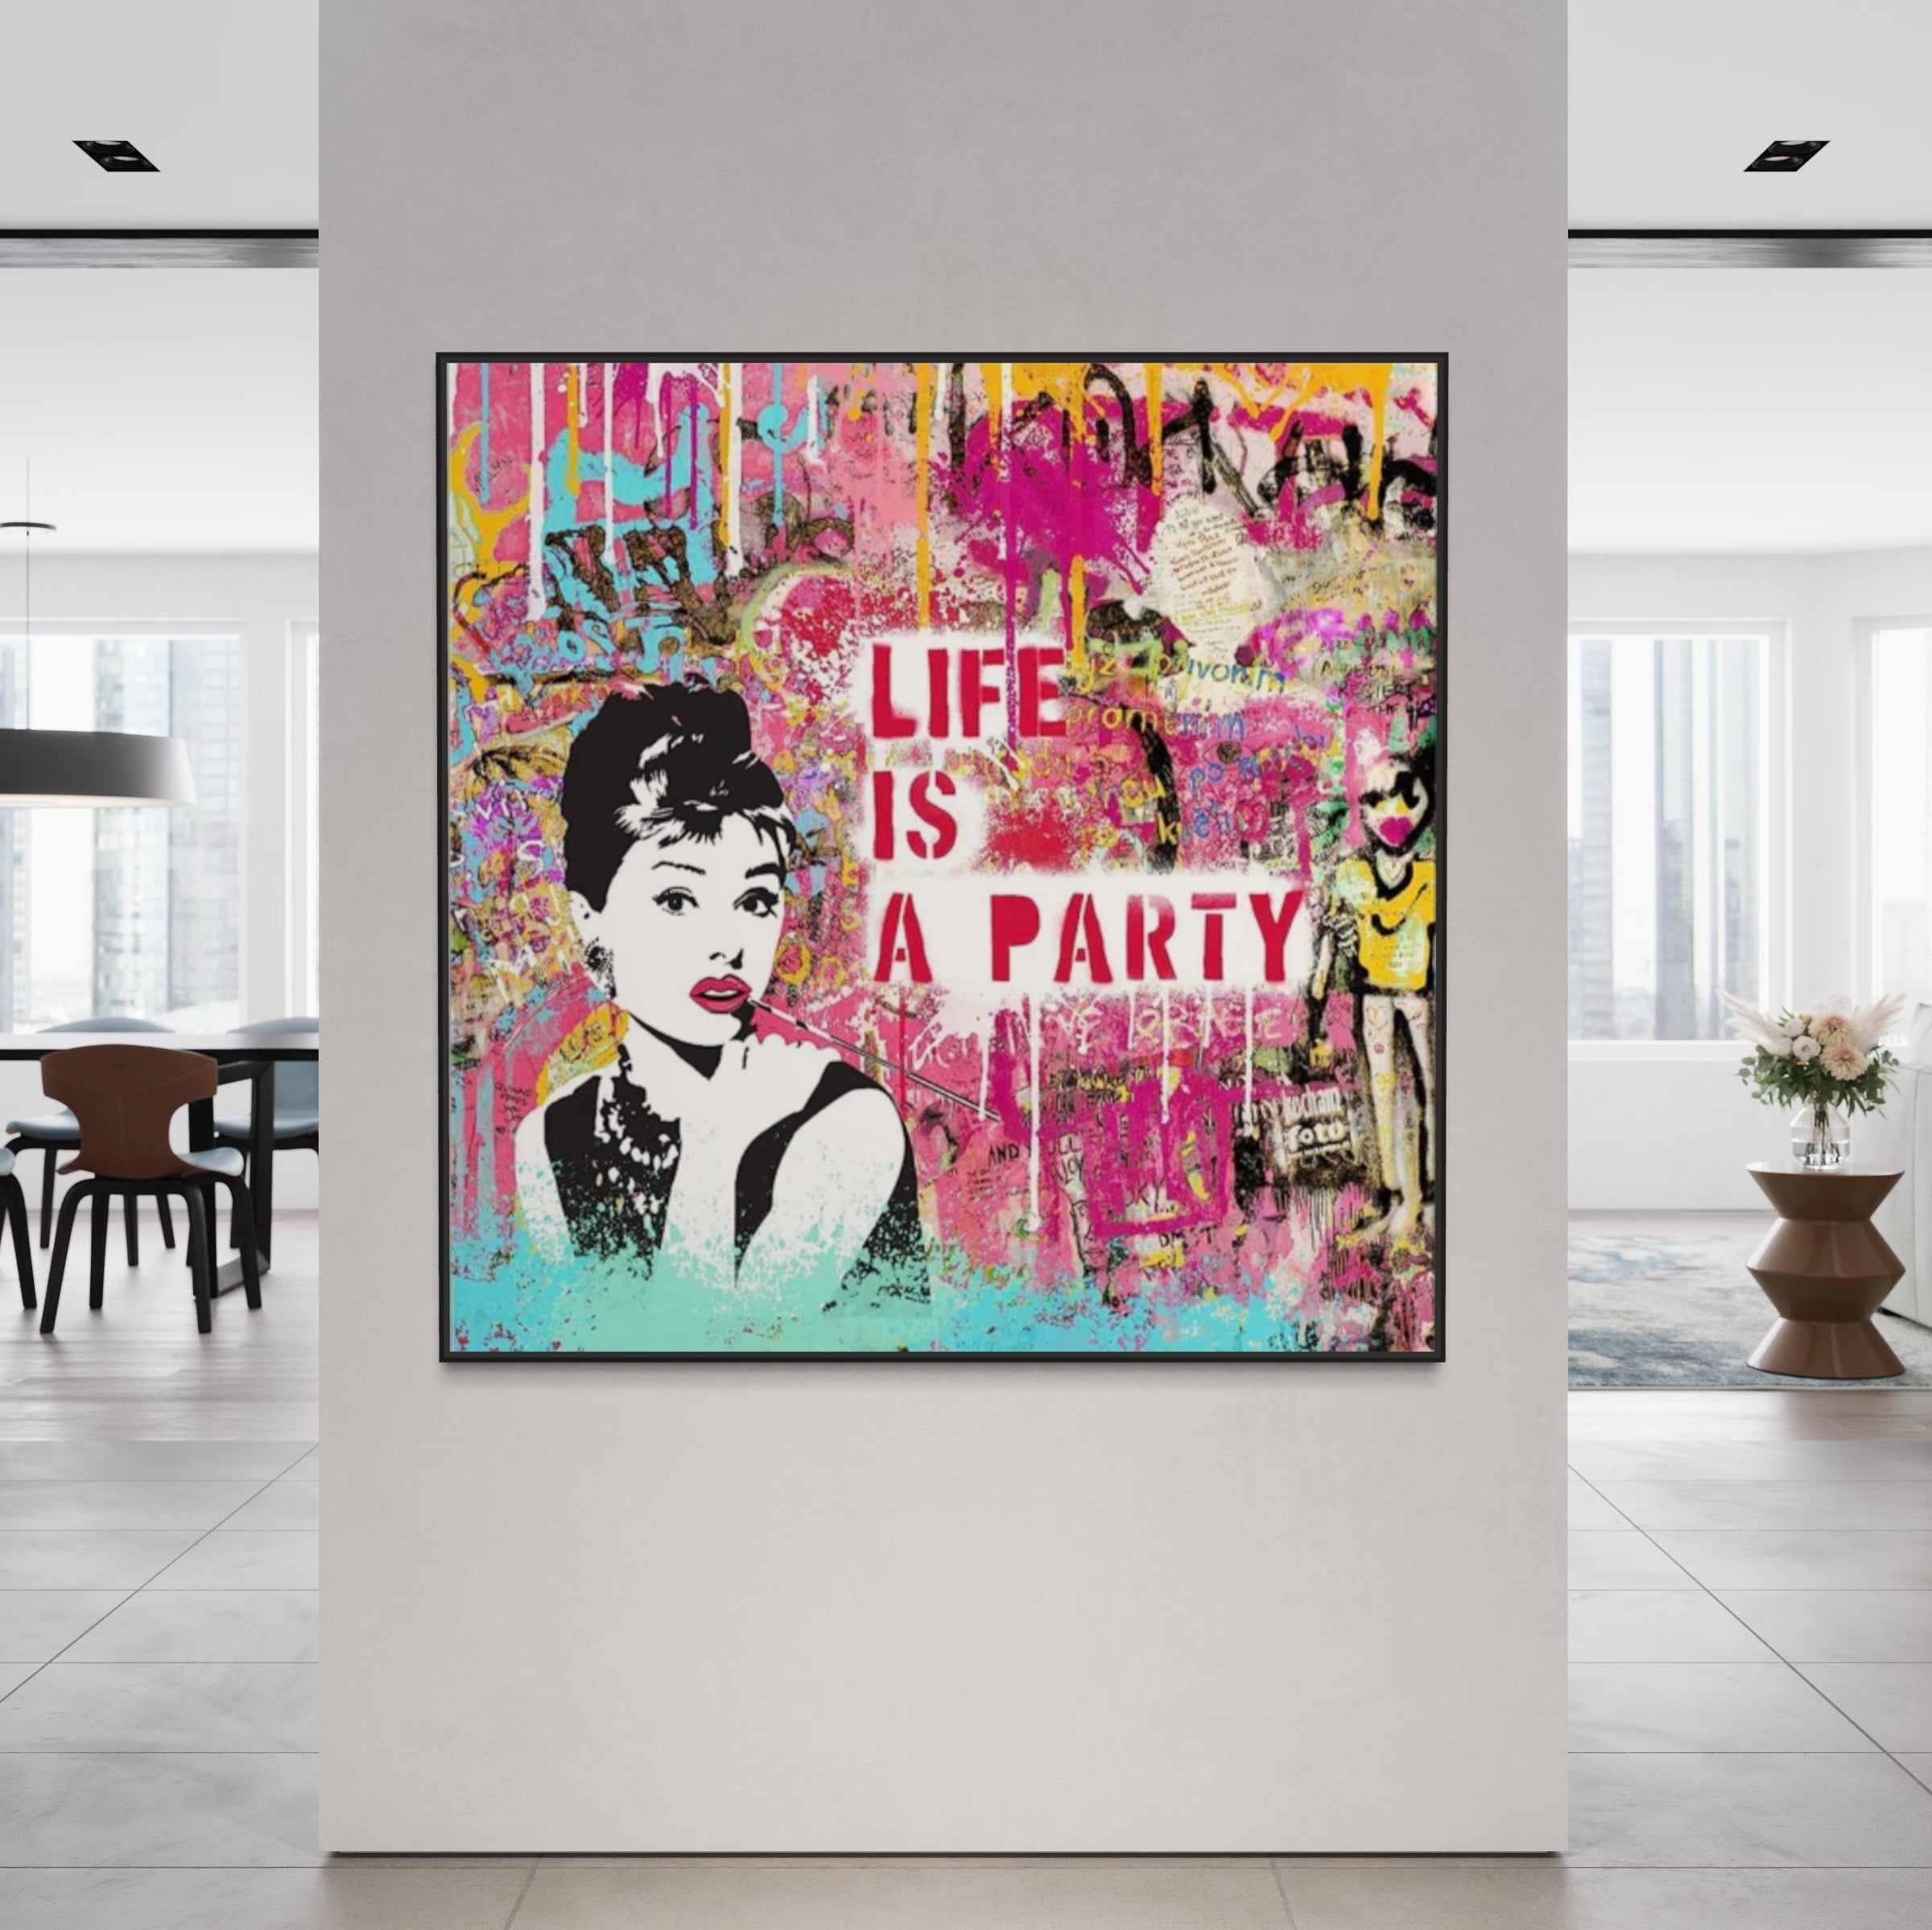 "Life is a Party" Graffiti Art